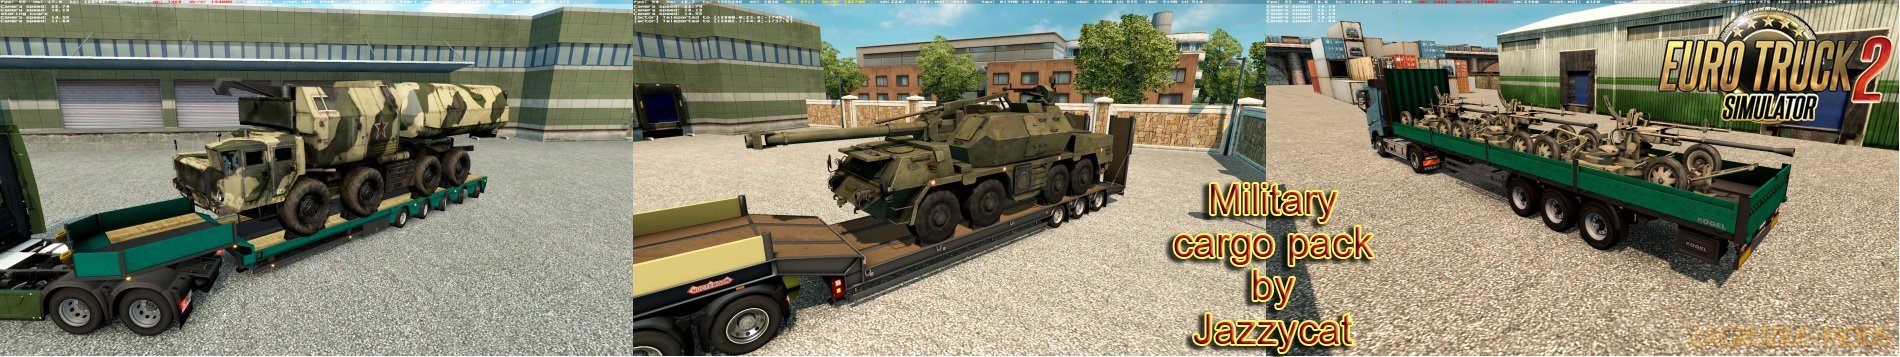 Military Cargo Pack v2.4 by Jazzycat